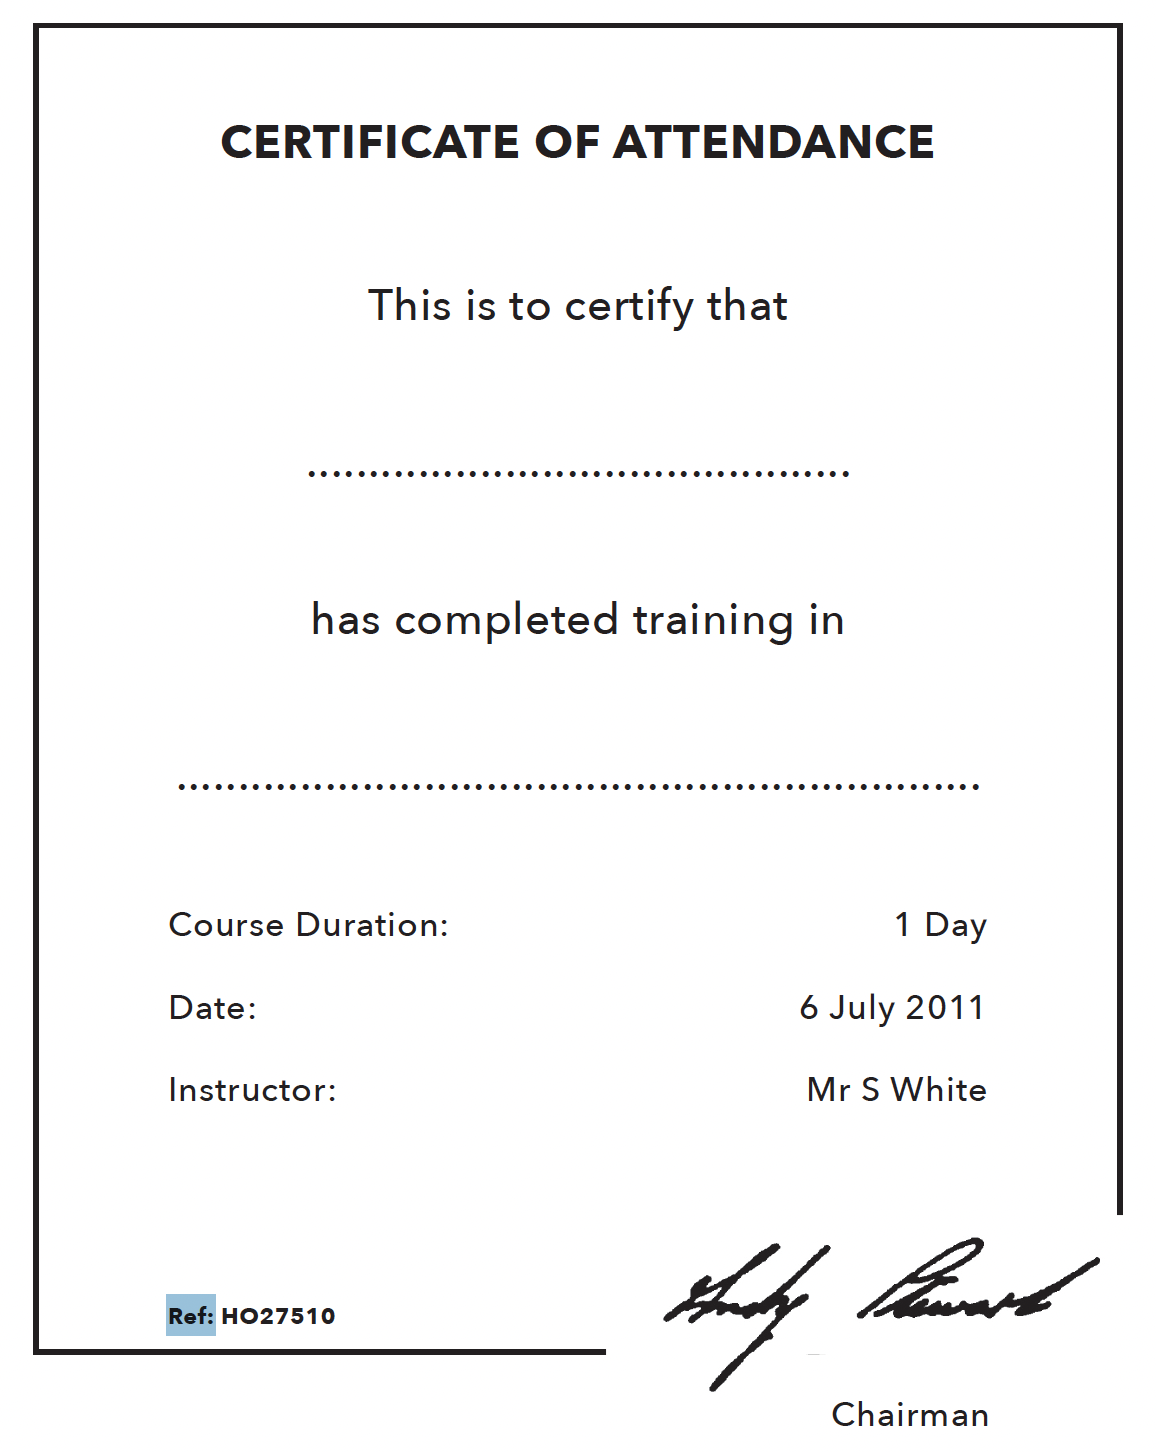 Certificate of attendance template to recognise training course has been completed.